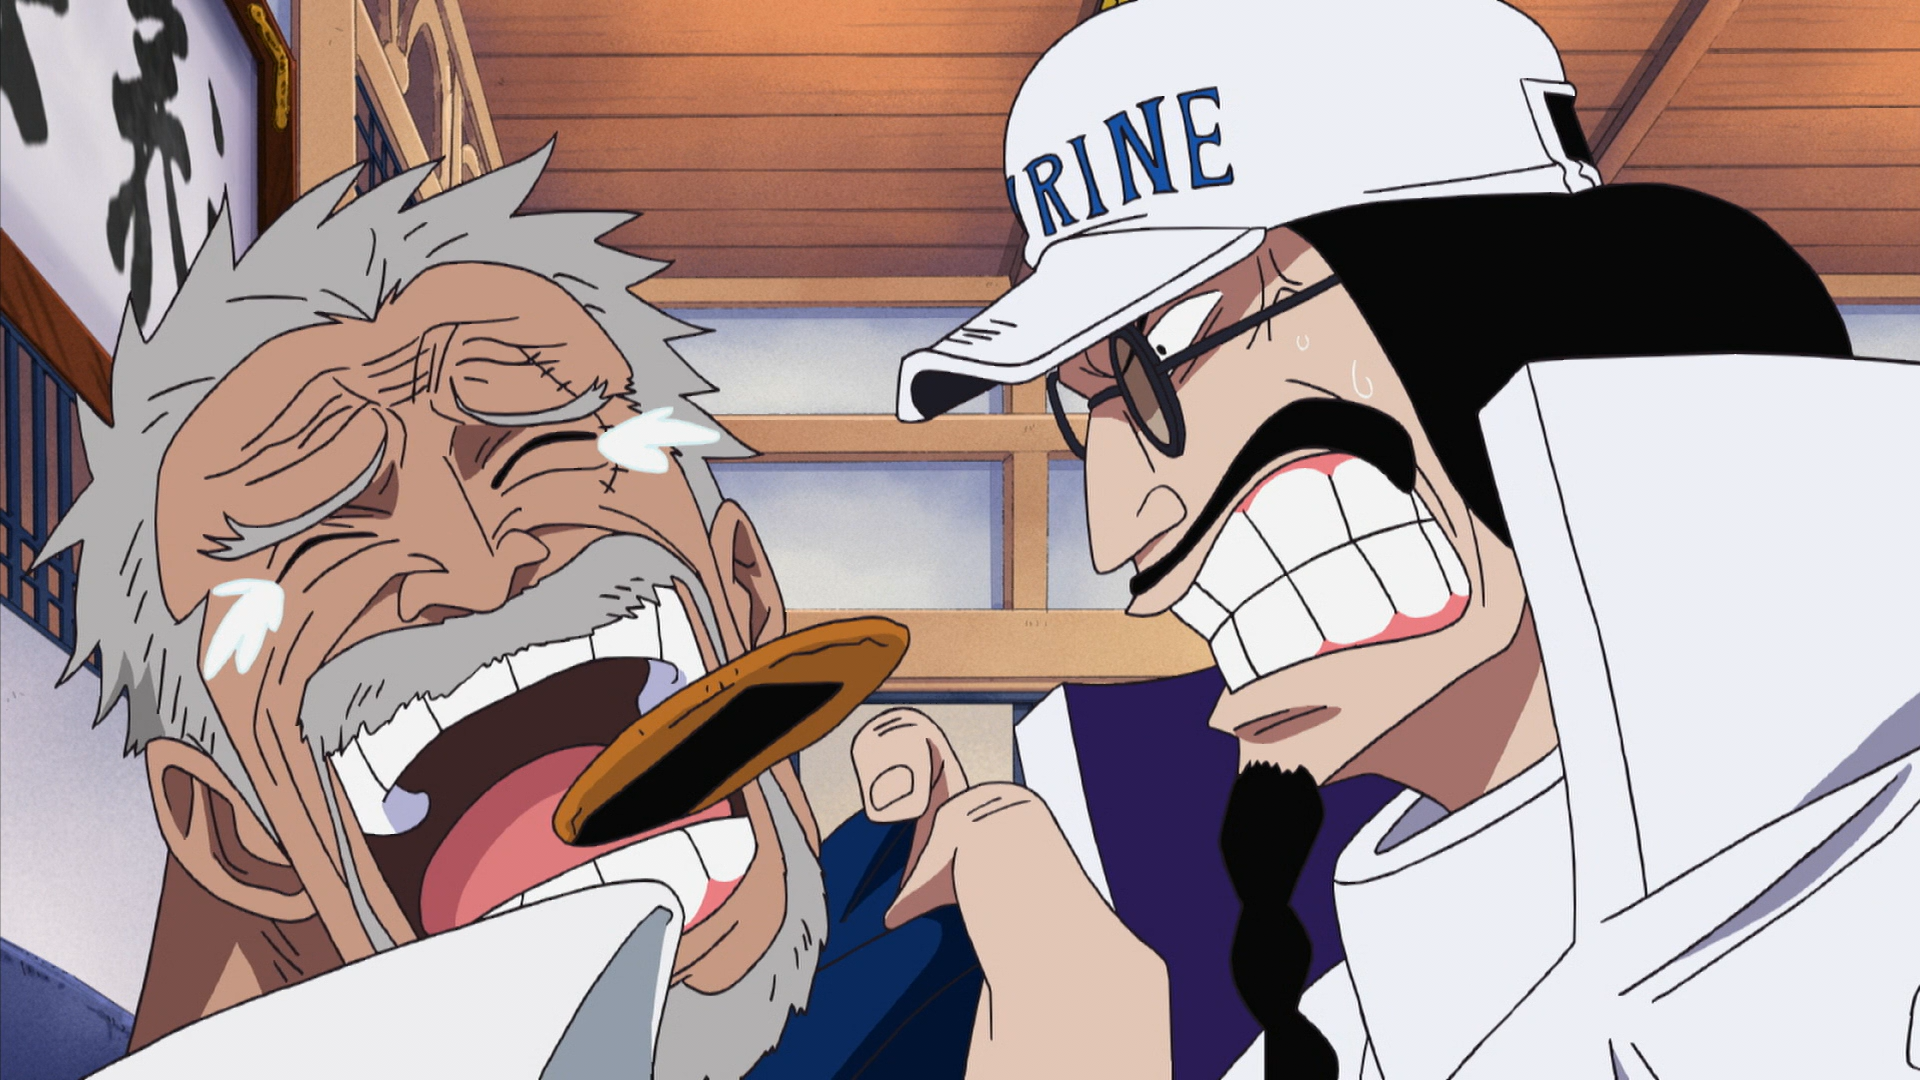 http://img2.wikia.nocookie.net/__cb20130912152454/onepiece/images/f/f9/Garp_and_Sengoku.png